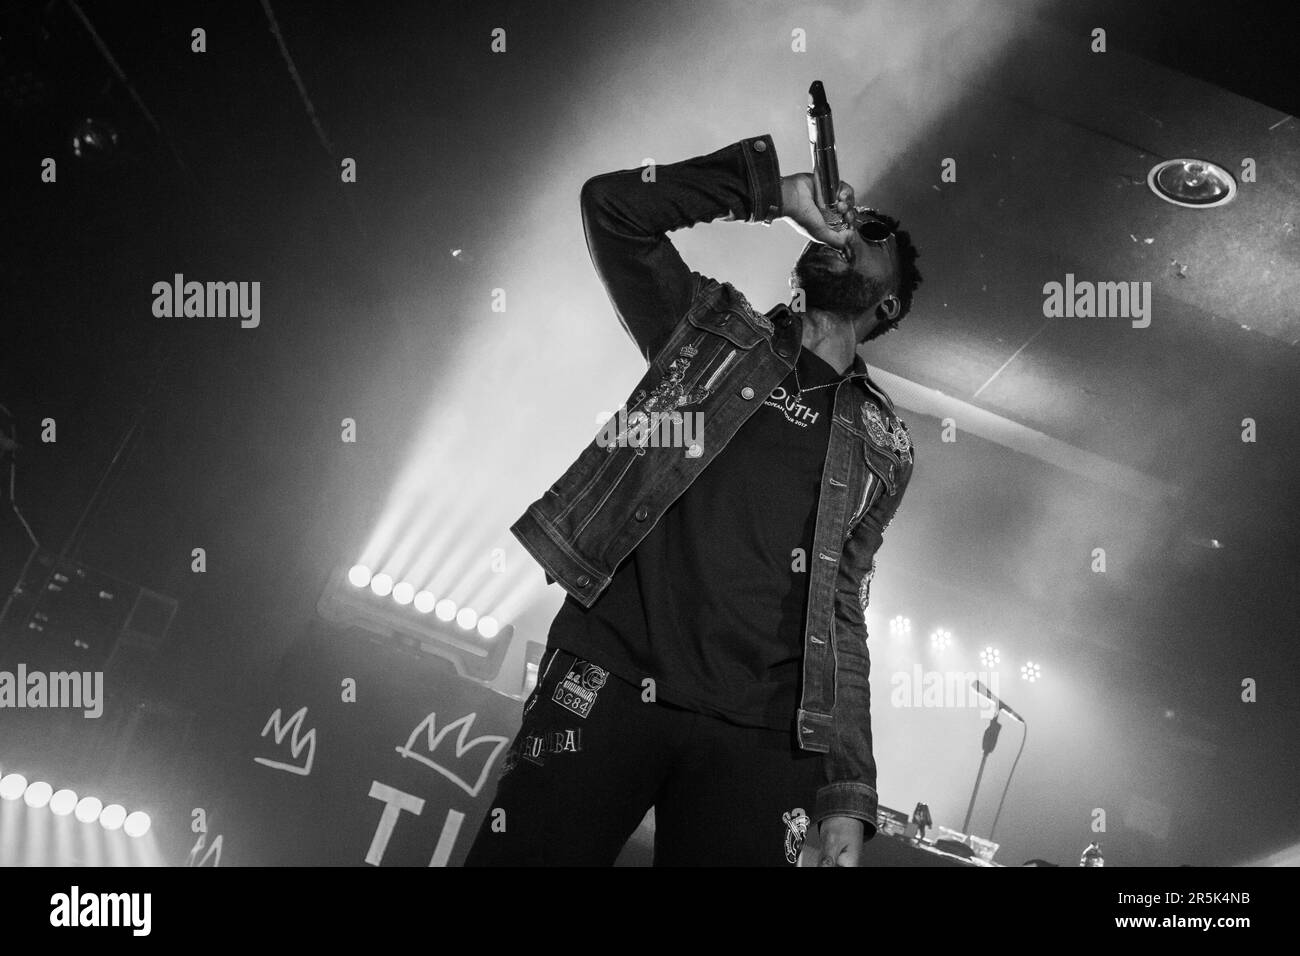 Cologne, Germany, 06.04.2017. British singer Tinie Tempah performing live at the Luxor in Cologne. Stock Photo